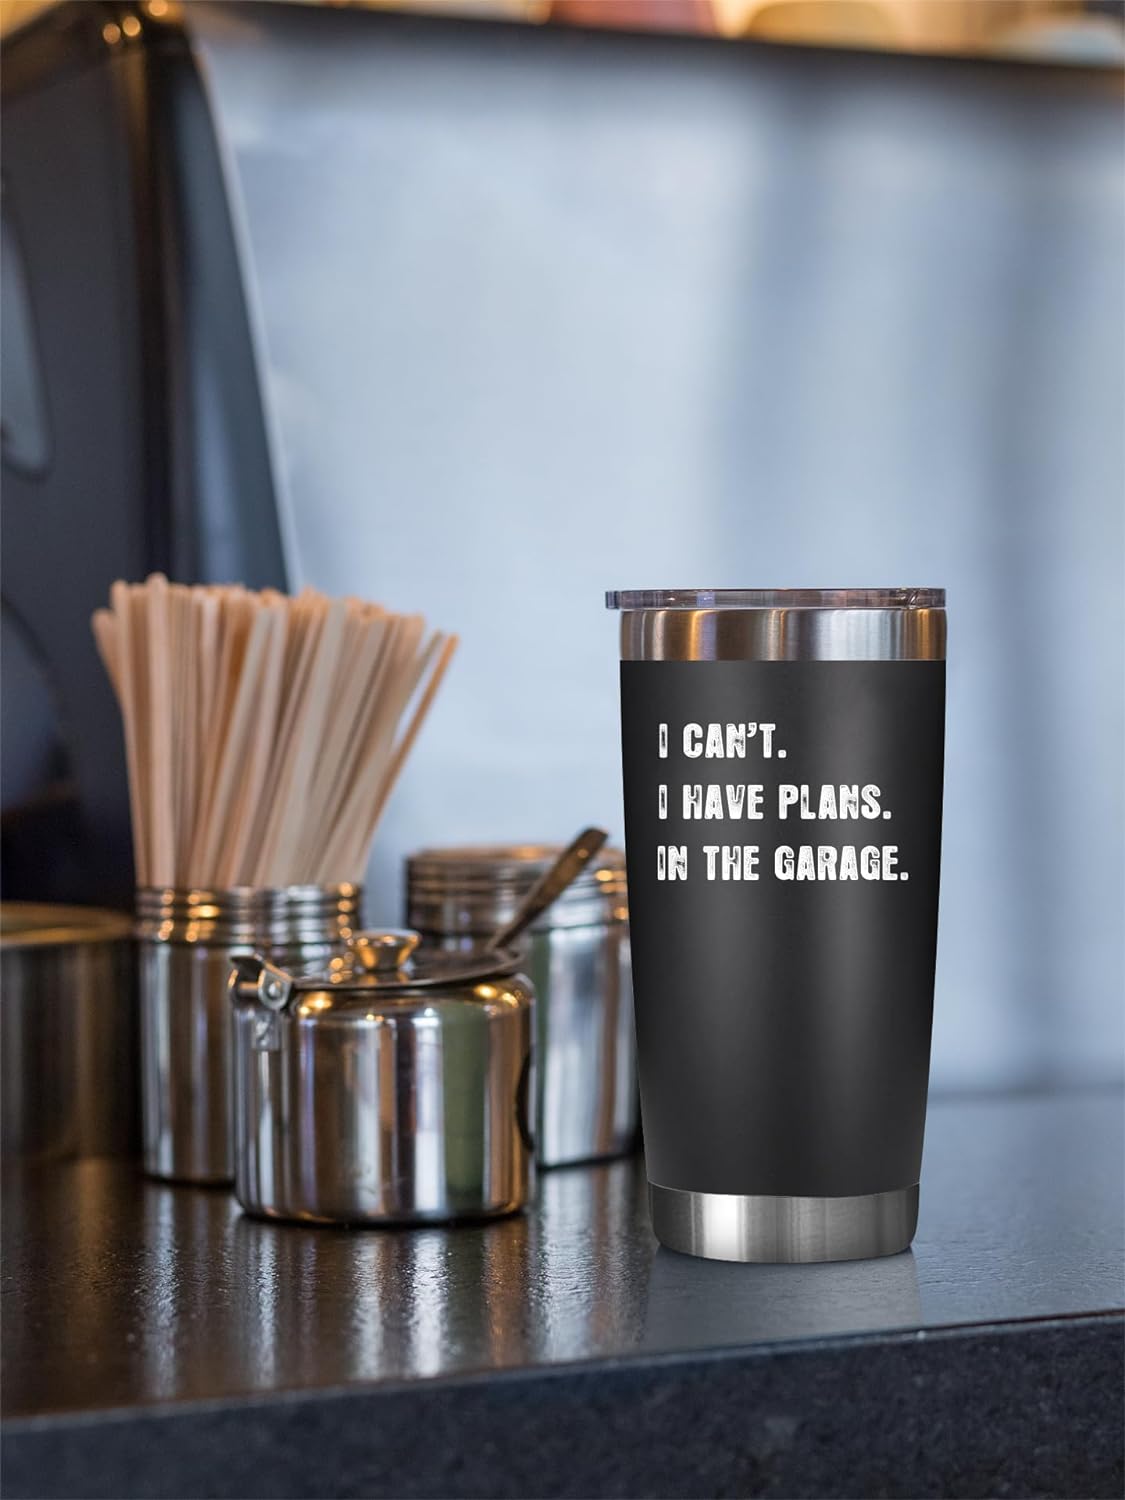 I Can’t I Have Plans In The Garage - 20 Oz Tumbler